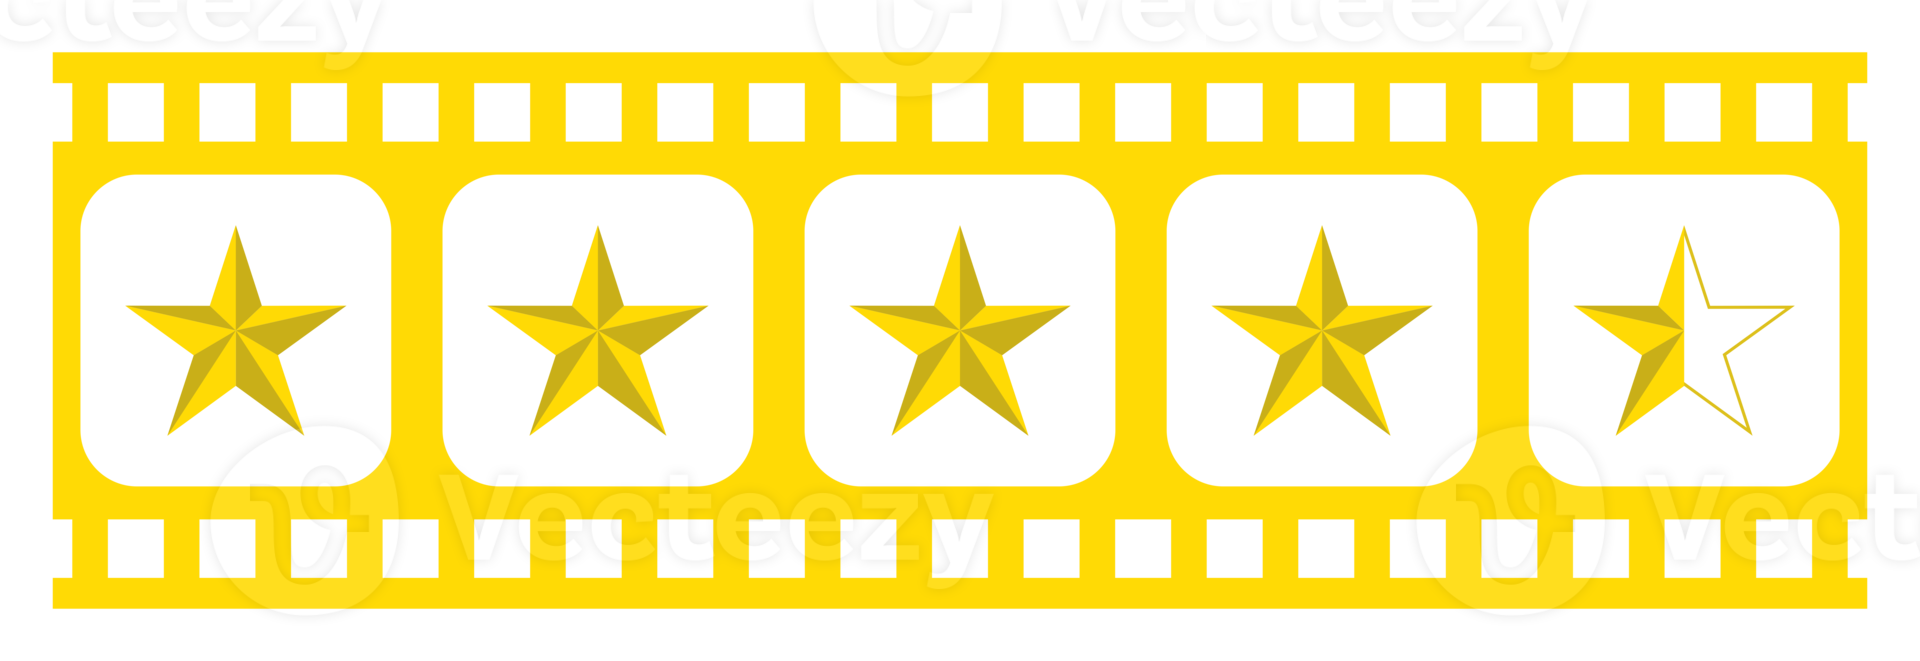 Visual of the Five 5 Star Sign in the Filmstrip Silhouette. Rating Icon Symbol for Film or Movie Review, Pictogram, Apps, Website or Graphic Design Element. Rating 4,5 Star. Format PNG